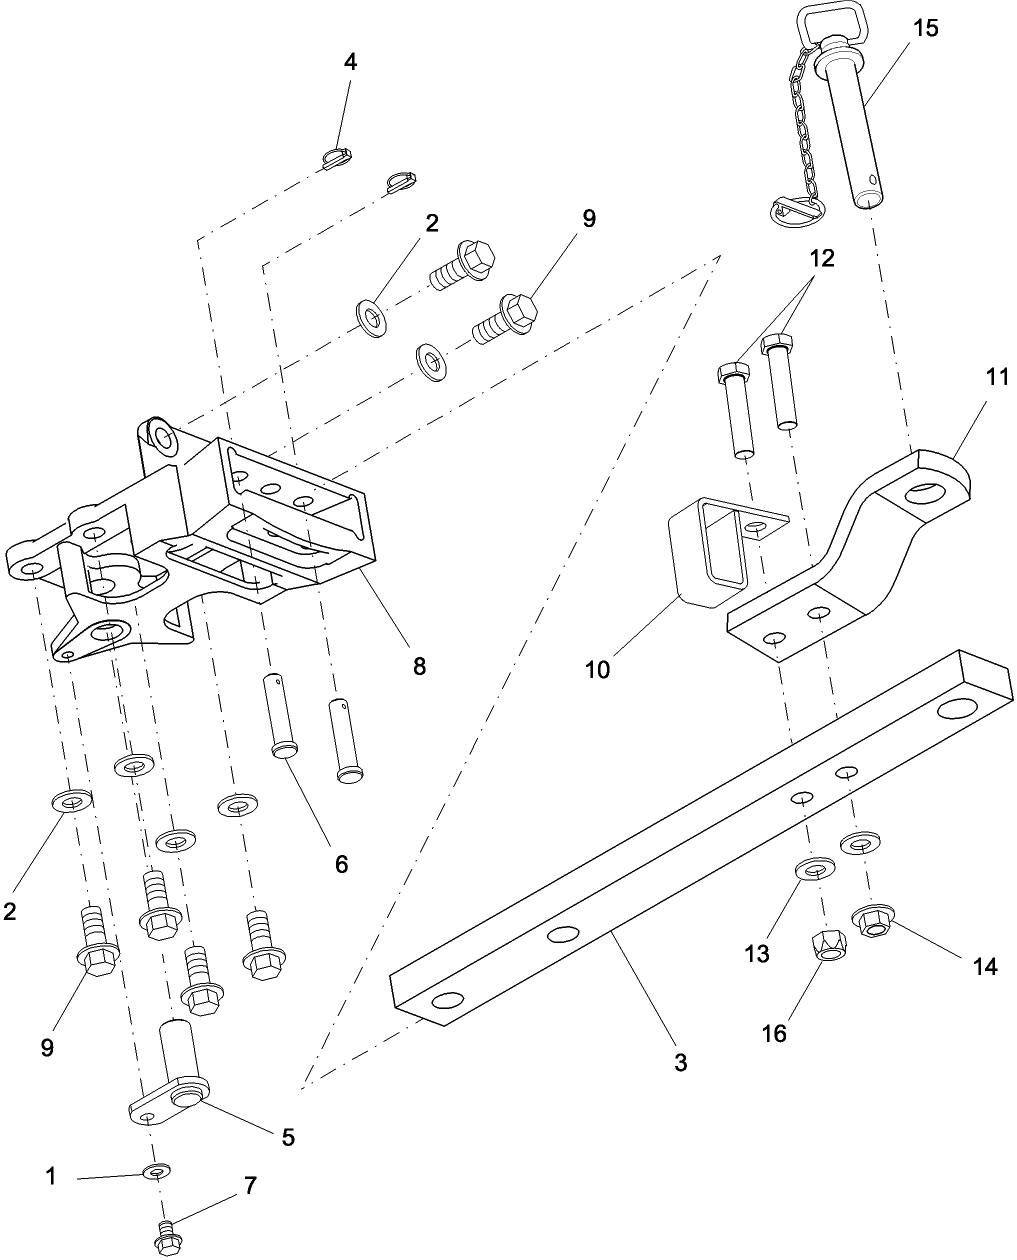 09.02 DELUXE DRAWBAR ASSEMBLY